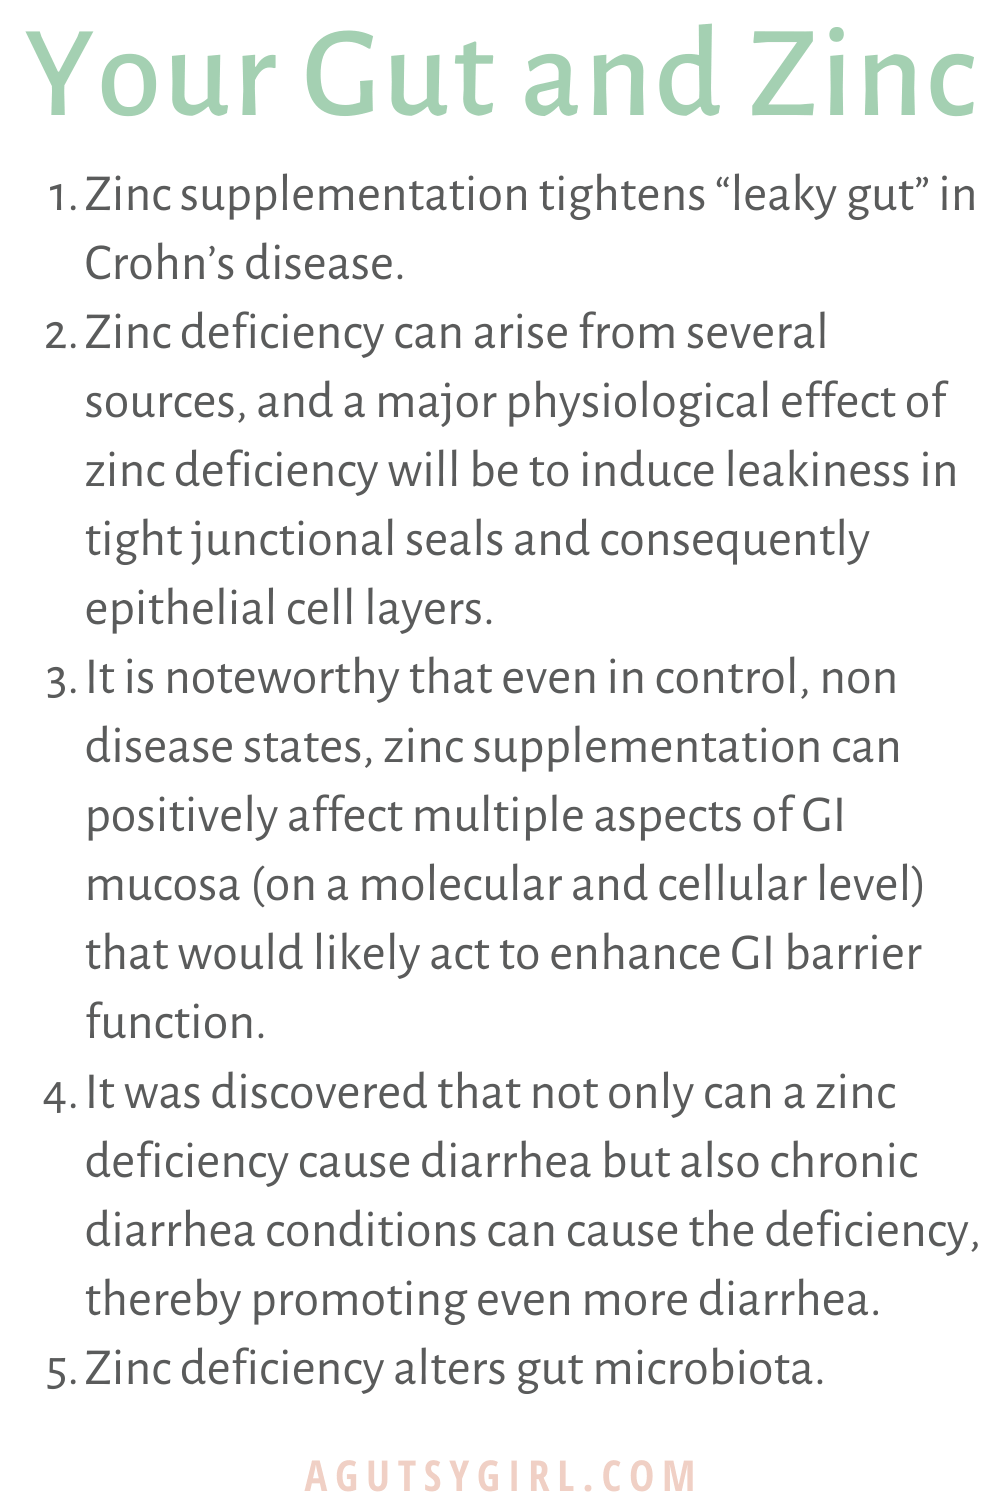 Why Zinc is Important for Gut Health agutsygirl.com #zinc #guthealth #minerals #supplements facts about